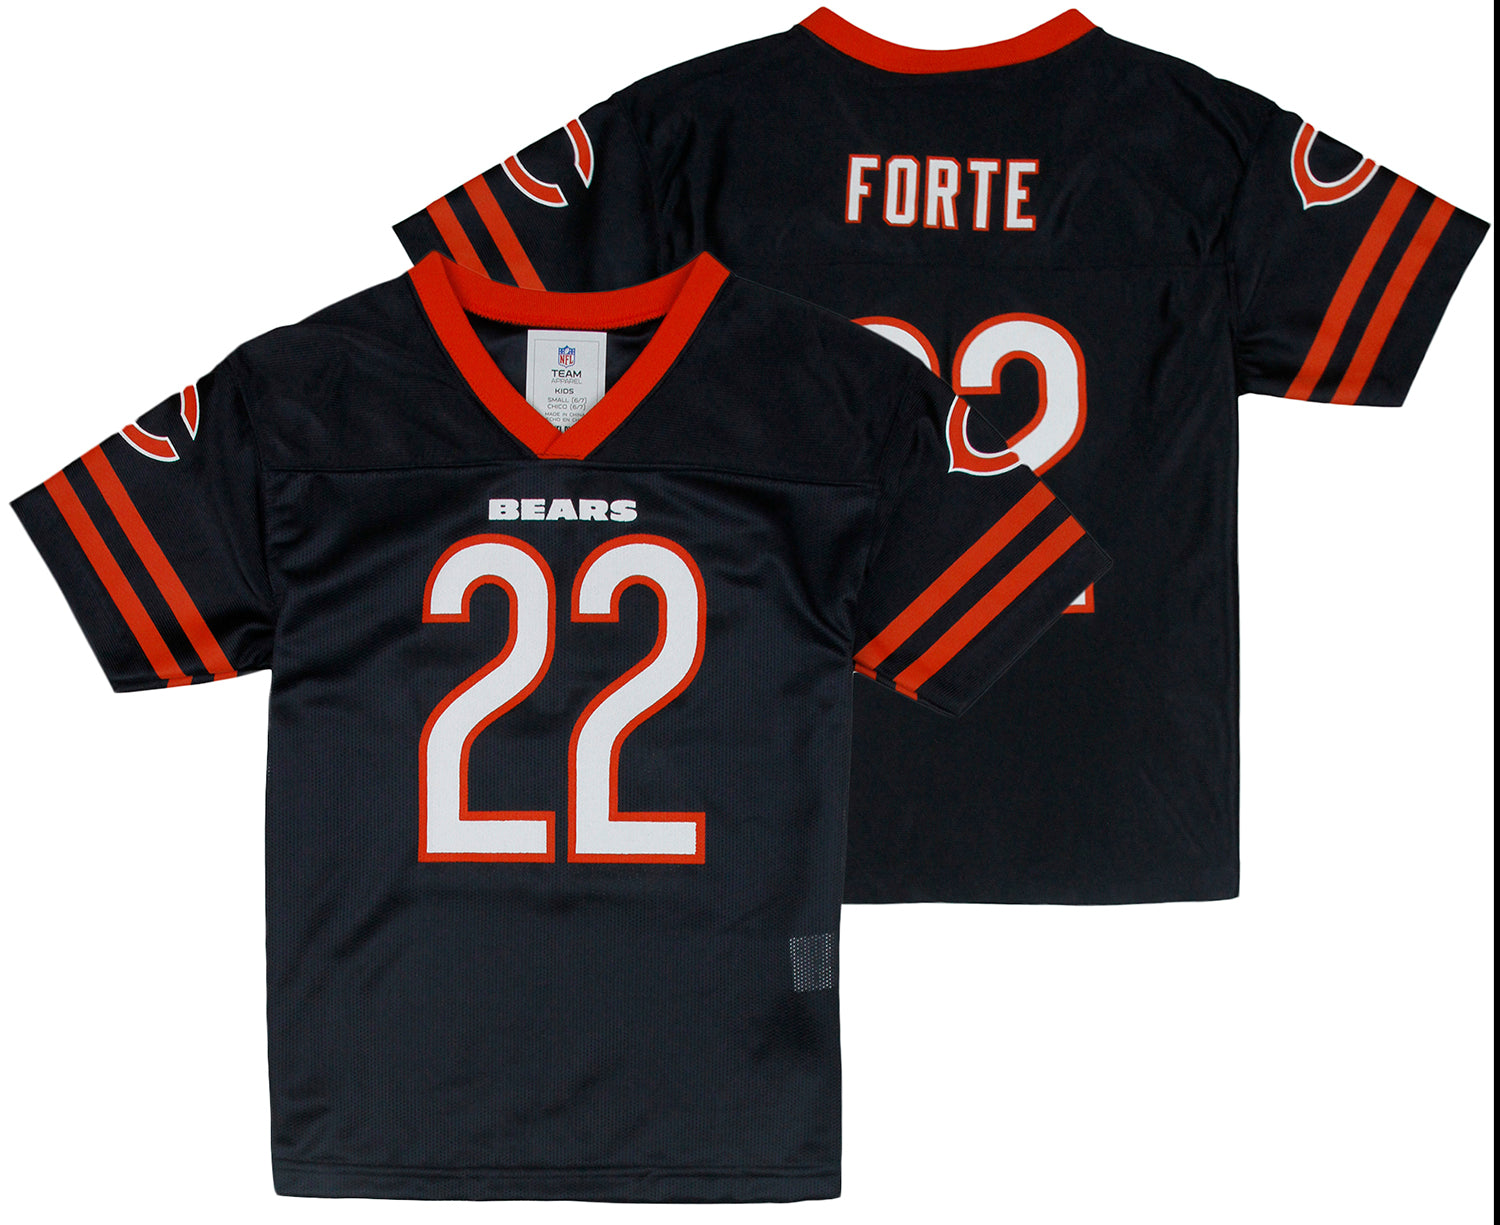 chicago bears jersey forte